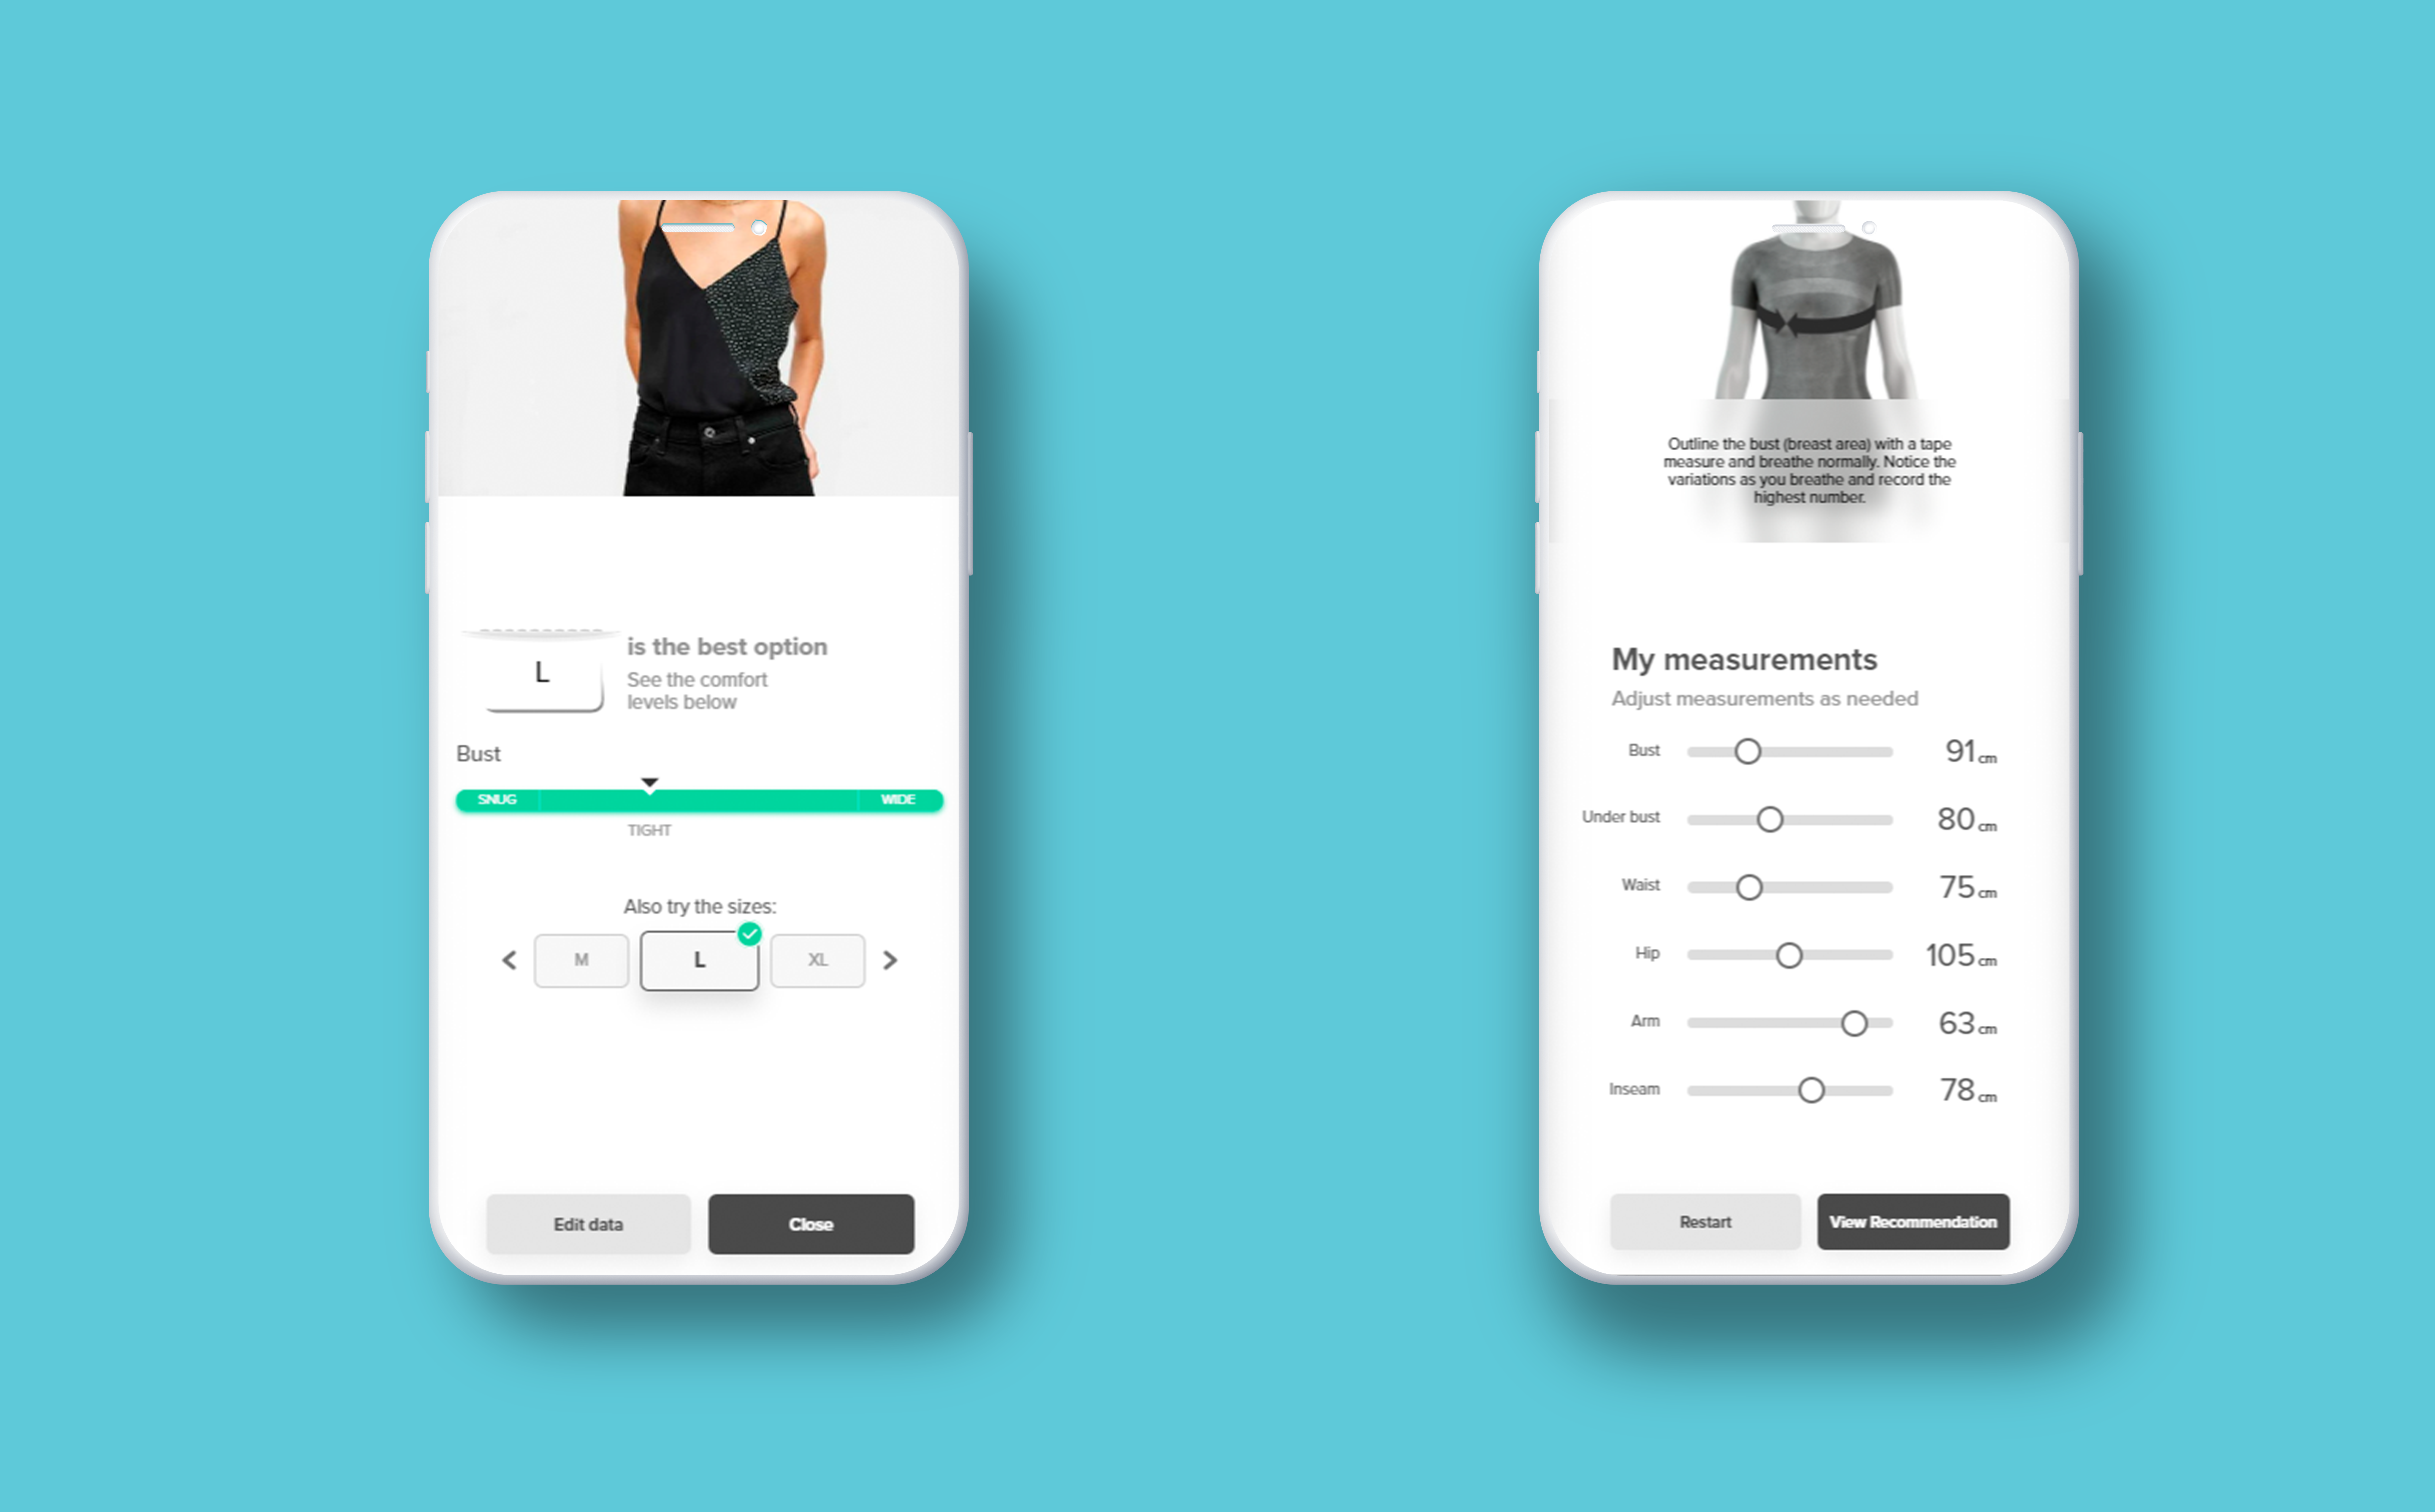 Then, the algorithm makes a size recommendation, and the client also can see and adjust the body measurements predicted to a better fit.